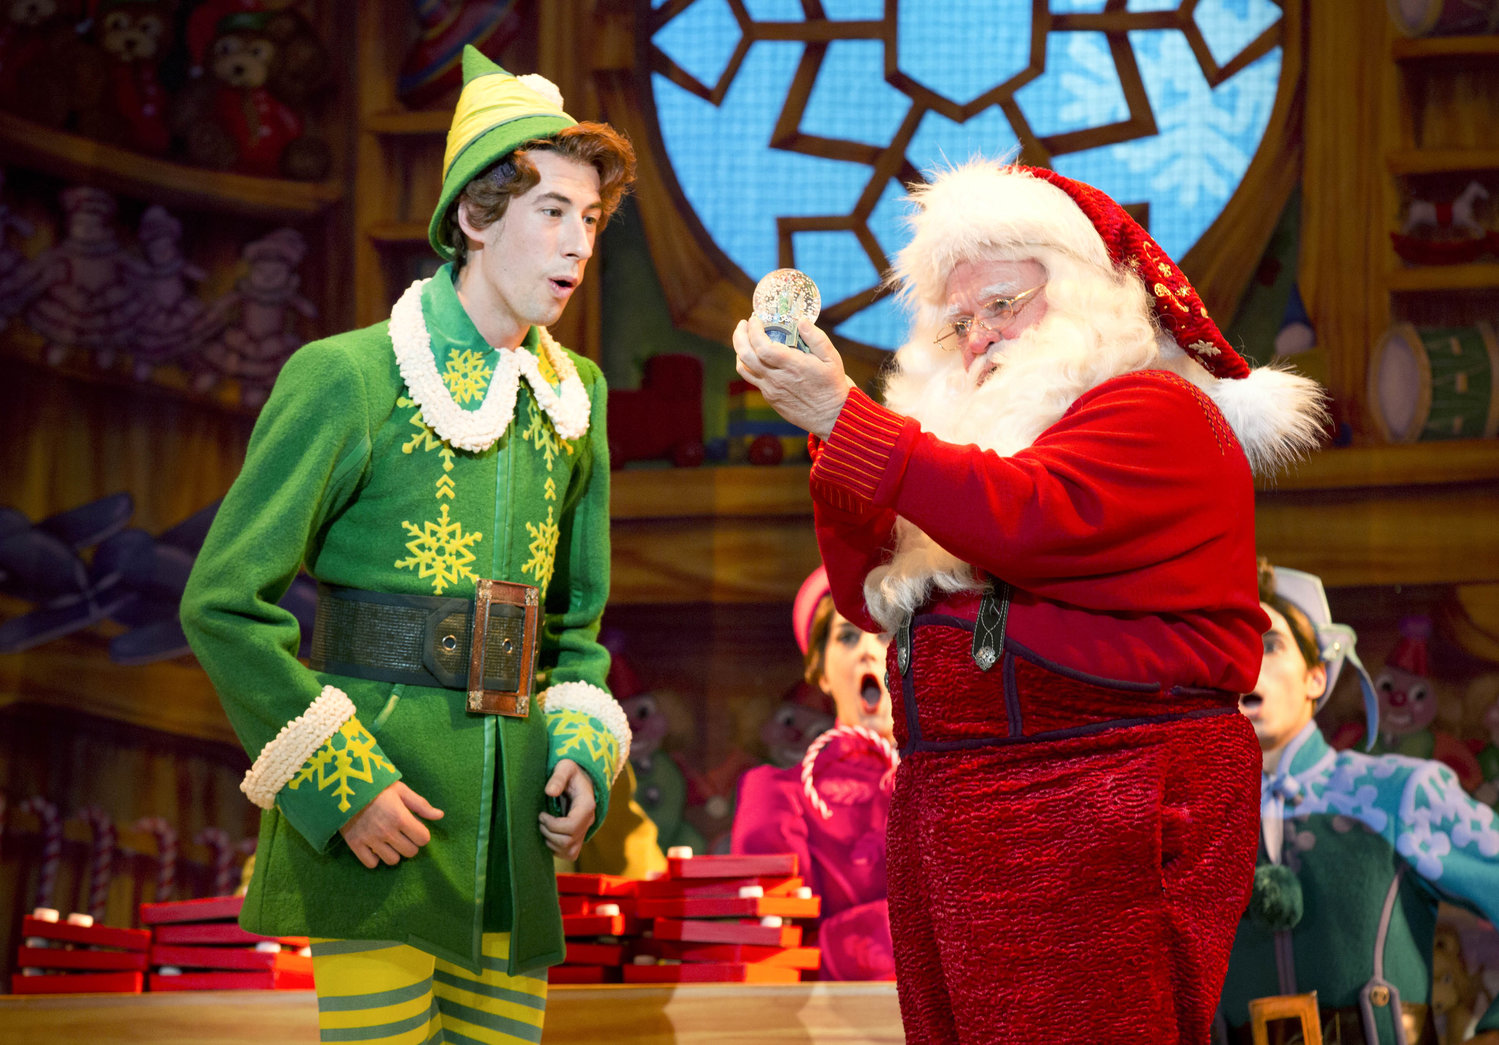 Buddy the Elf confers with Santa in this scene from ‘Elf the Musical,’ presented at 7 p.m. Nov. 16-17 at The Stanley Theatre in Utica by The Broadway Theatre League.